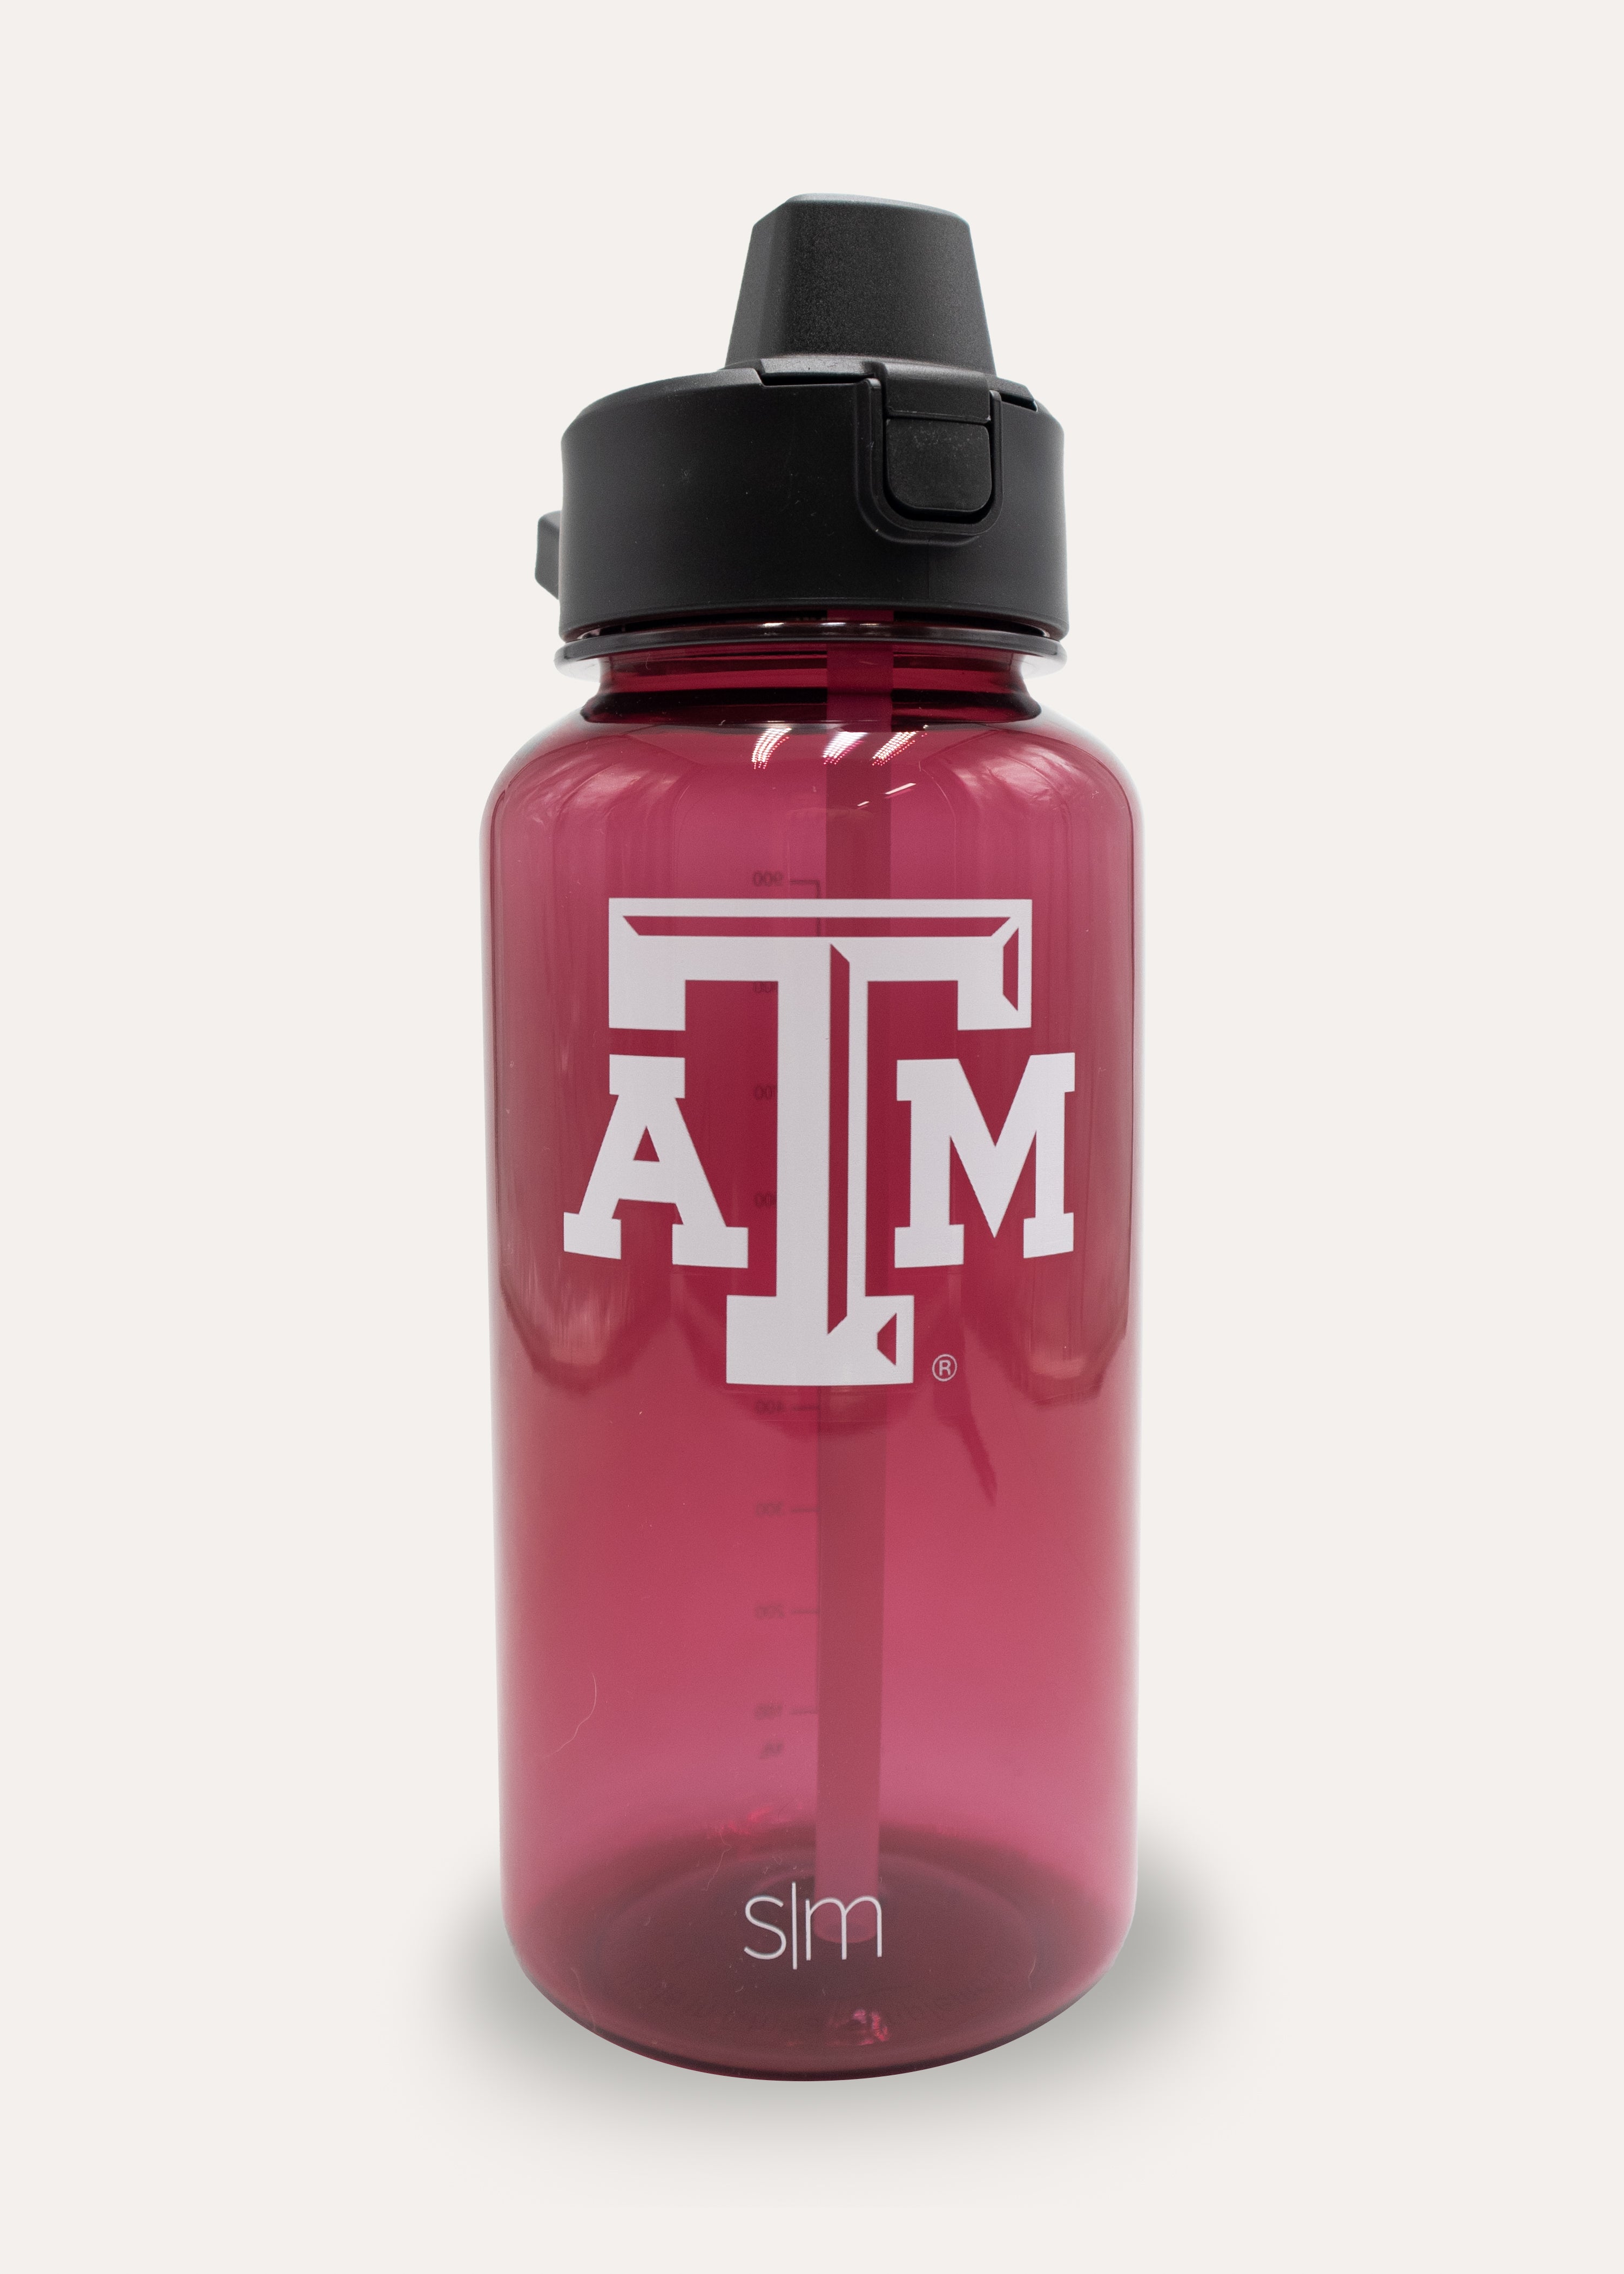 32 oz Water Bottle with Straw Red